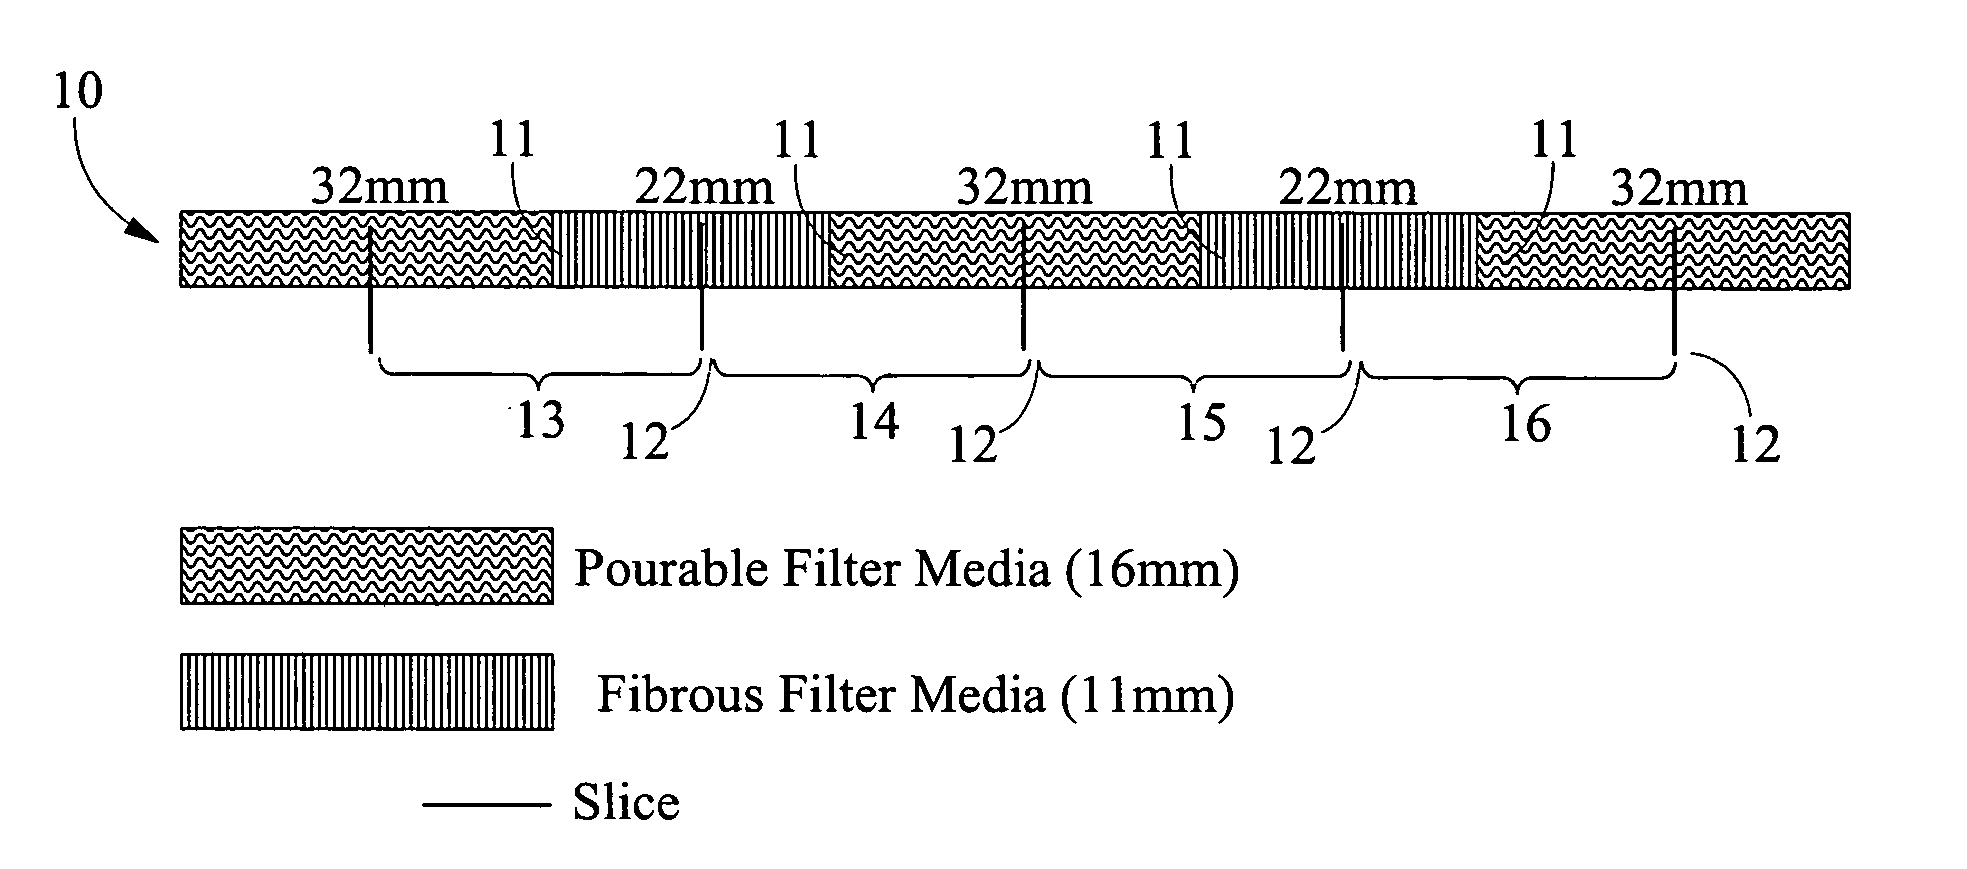 Producing triple section filters using a dual rod filter maker